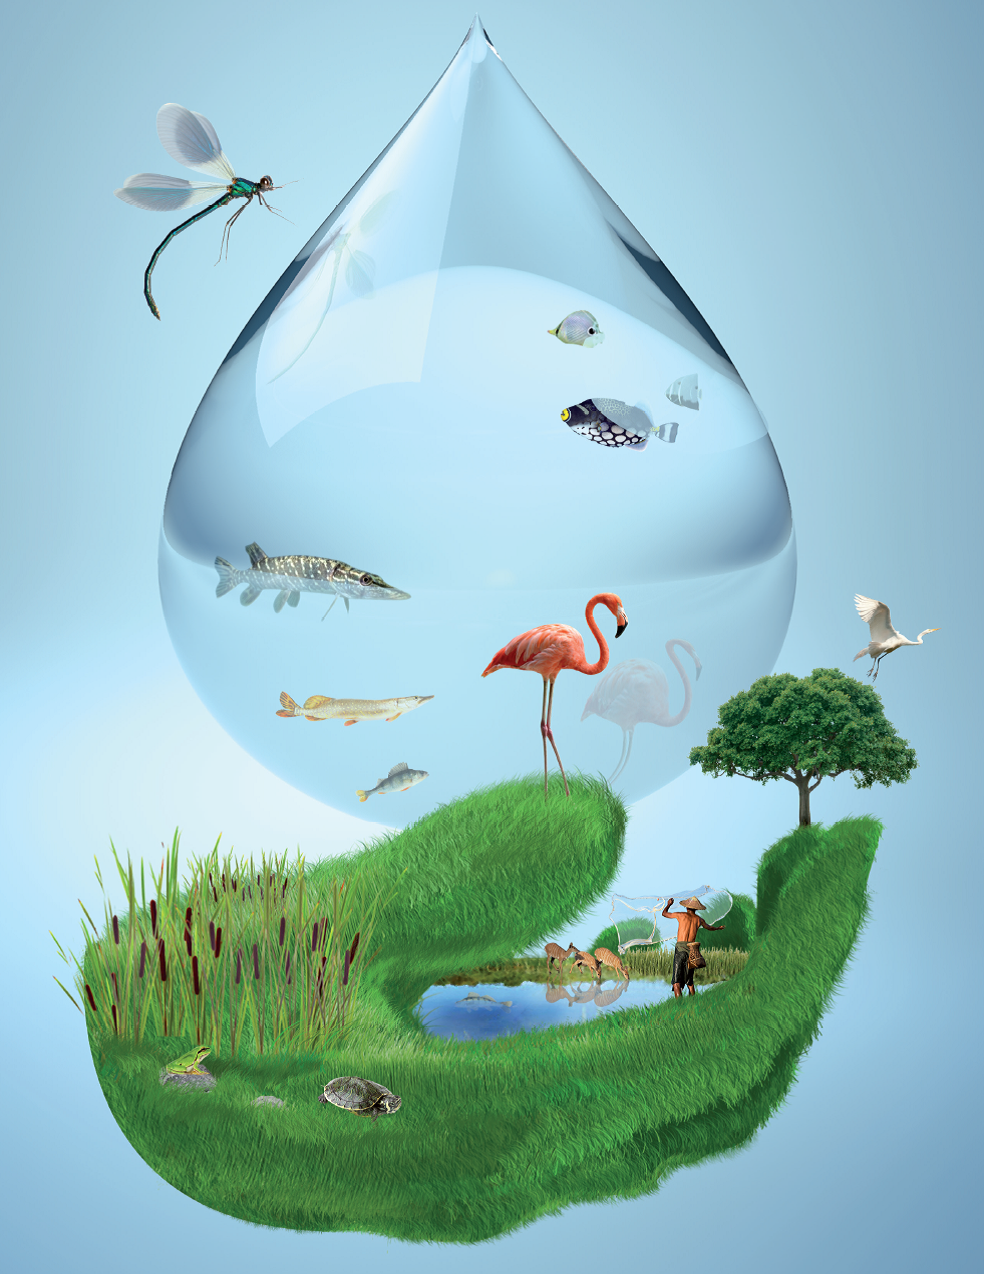 Image of World Wetlands Day poster